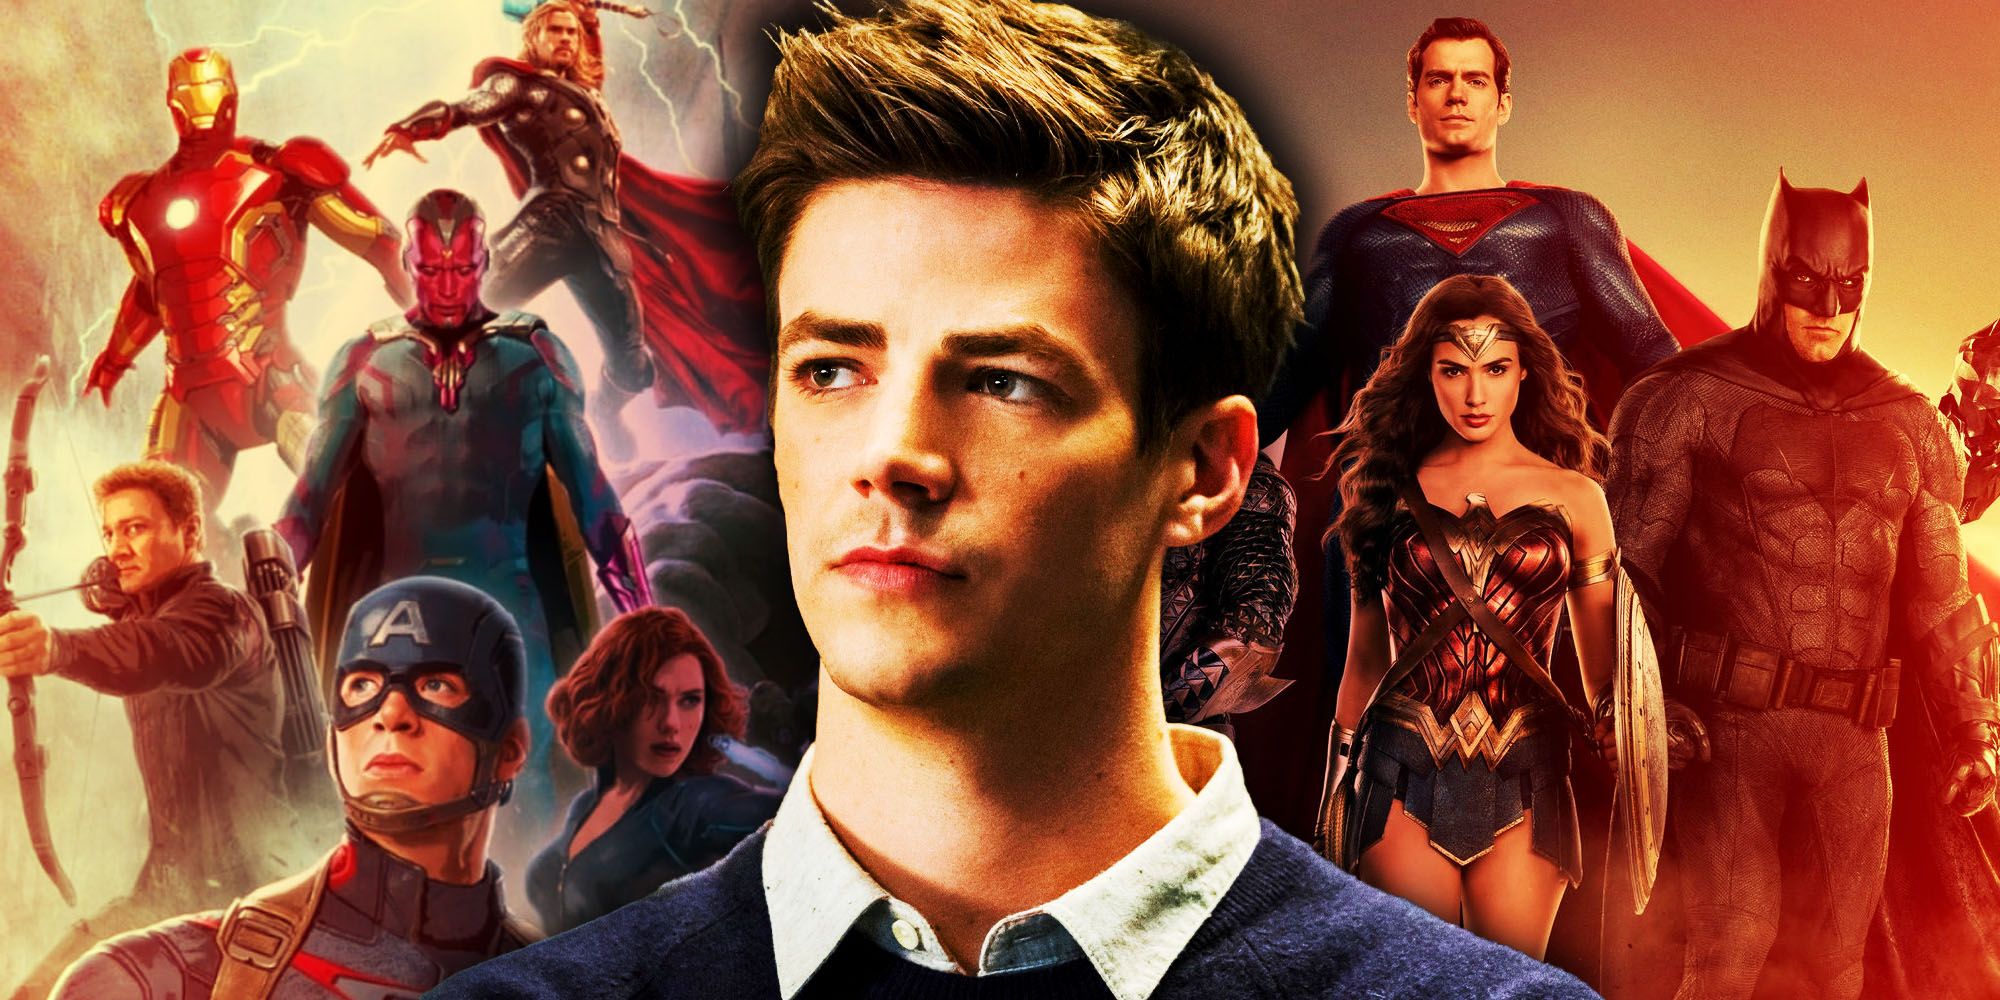 Grant Gustin as Barry Allen the Flash in front of the Justice League and the Avengers